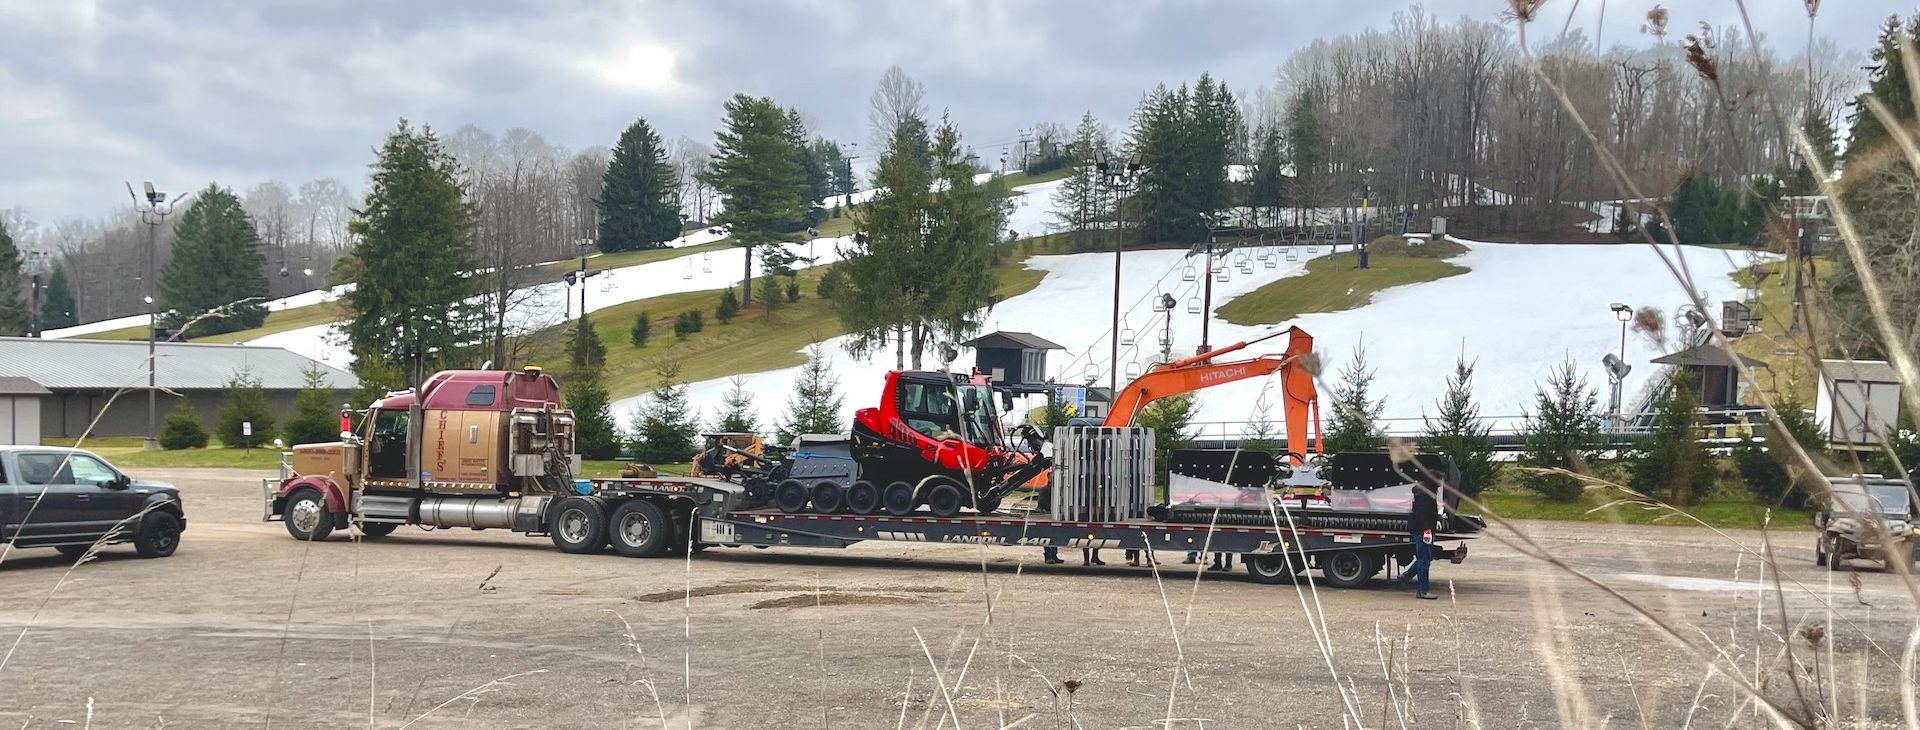 Pisten-Bully-400-Park-Pro_Arrival-on-Flatbed_Snow-Trails-OH